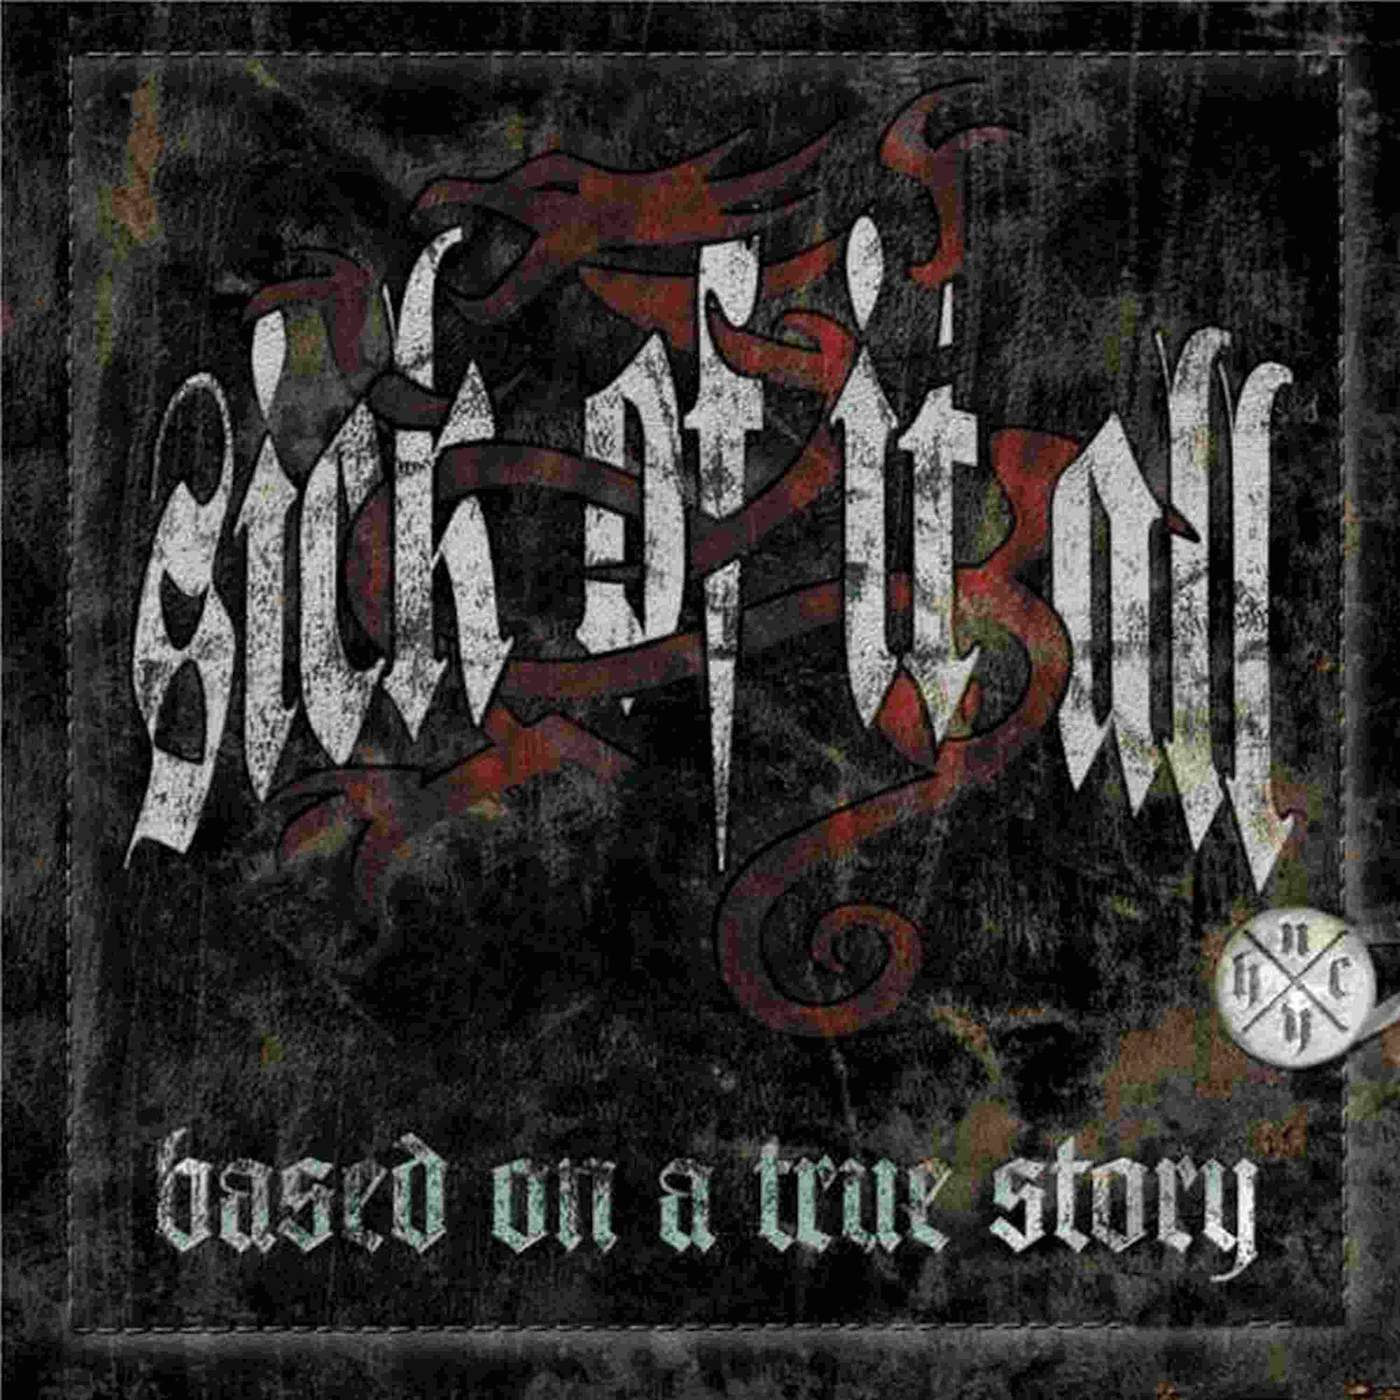 Sick Of It All Based On A True Story Vinyl Record